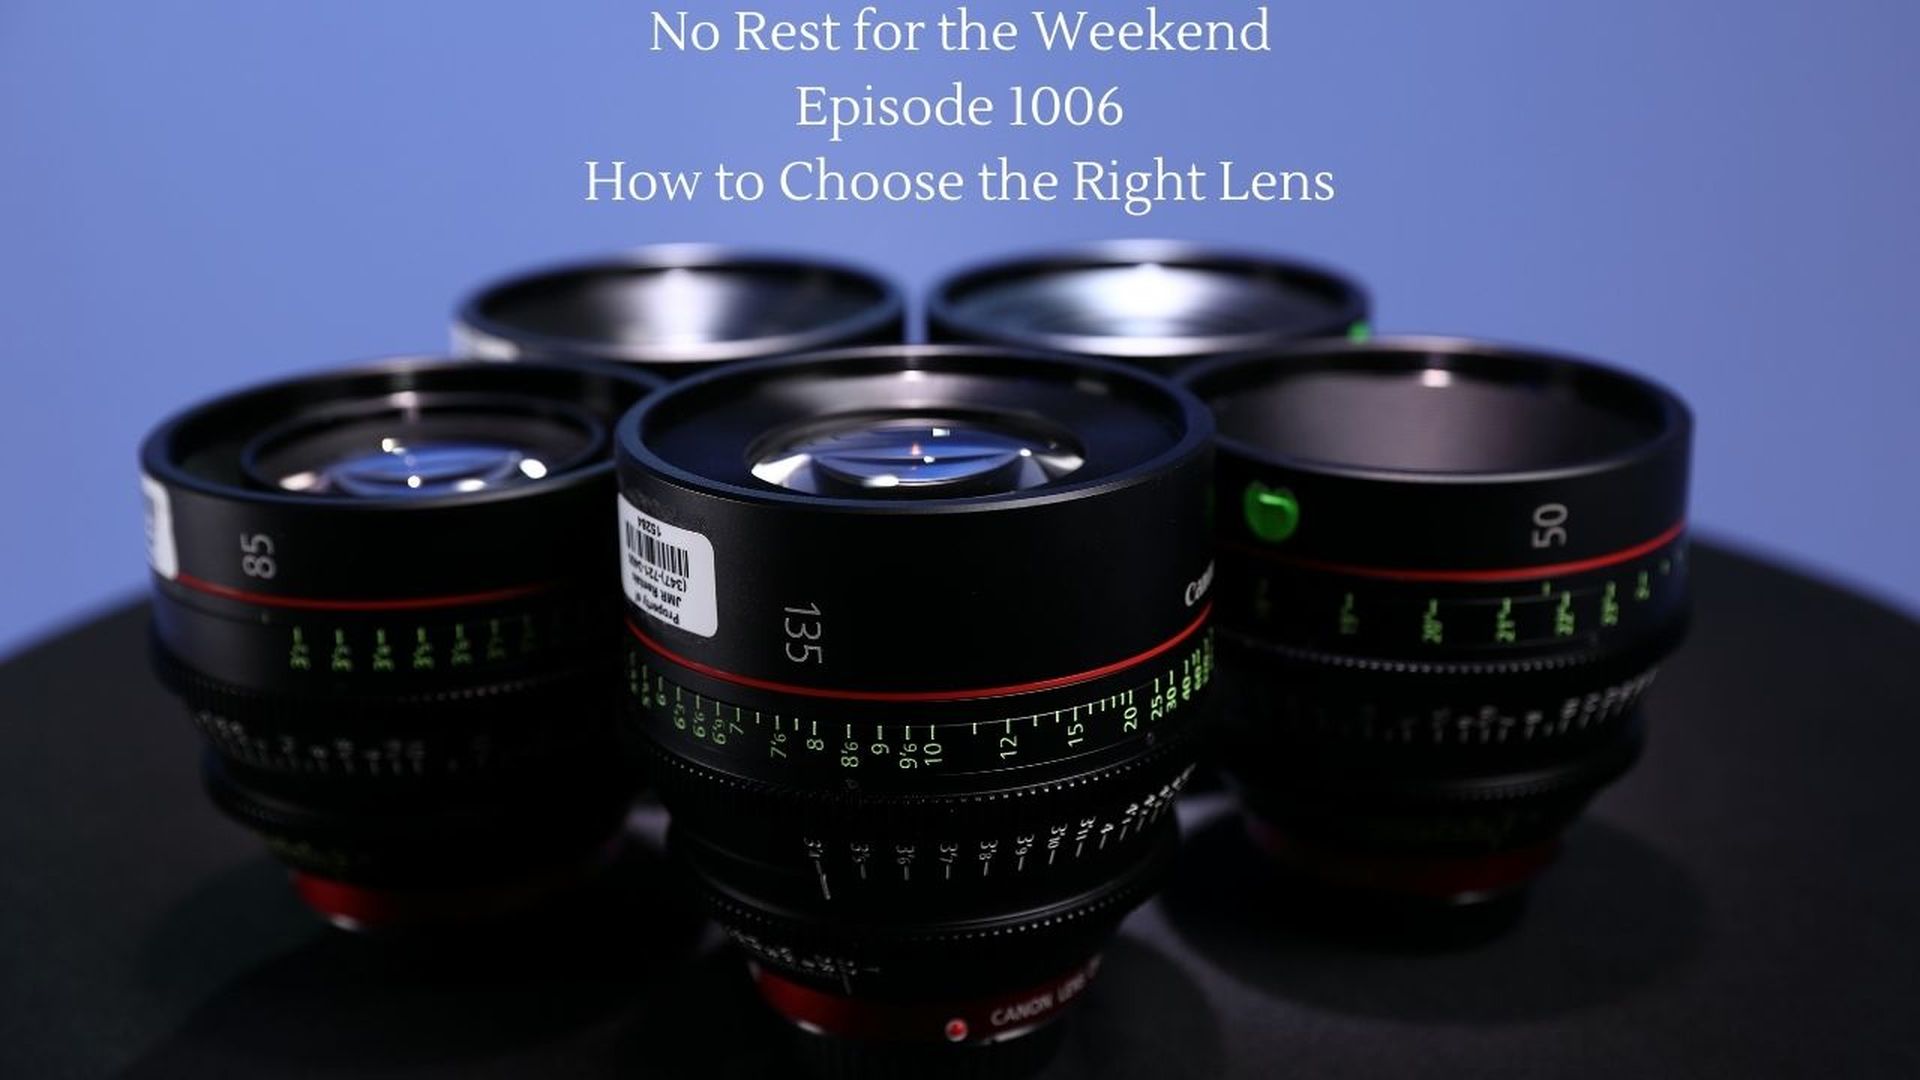 Episode 1006: How to Choose the Right Lens